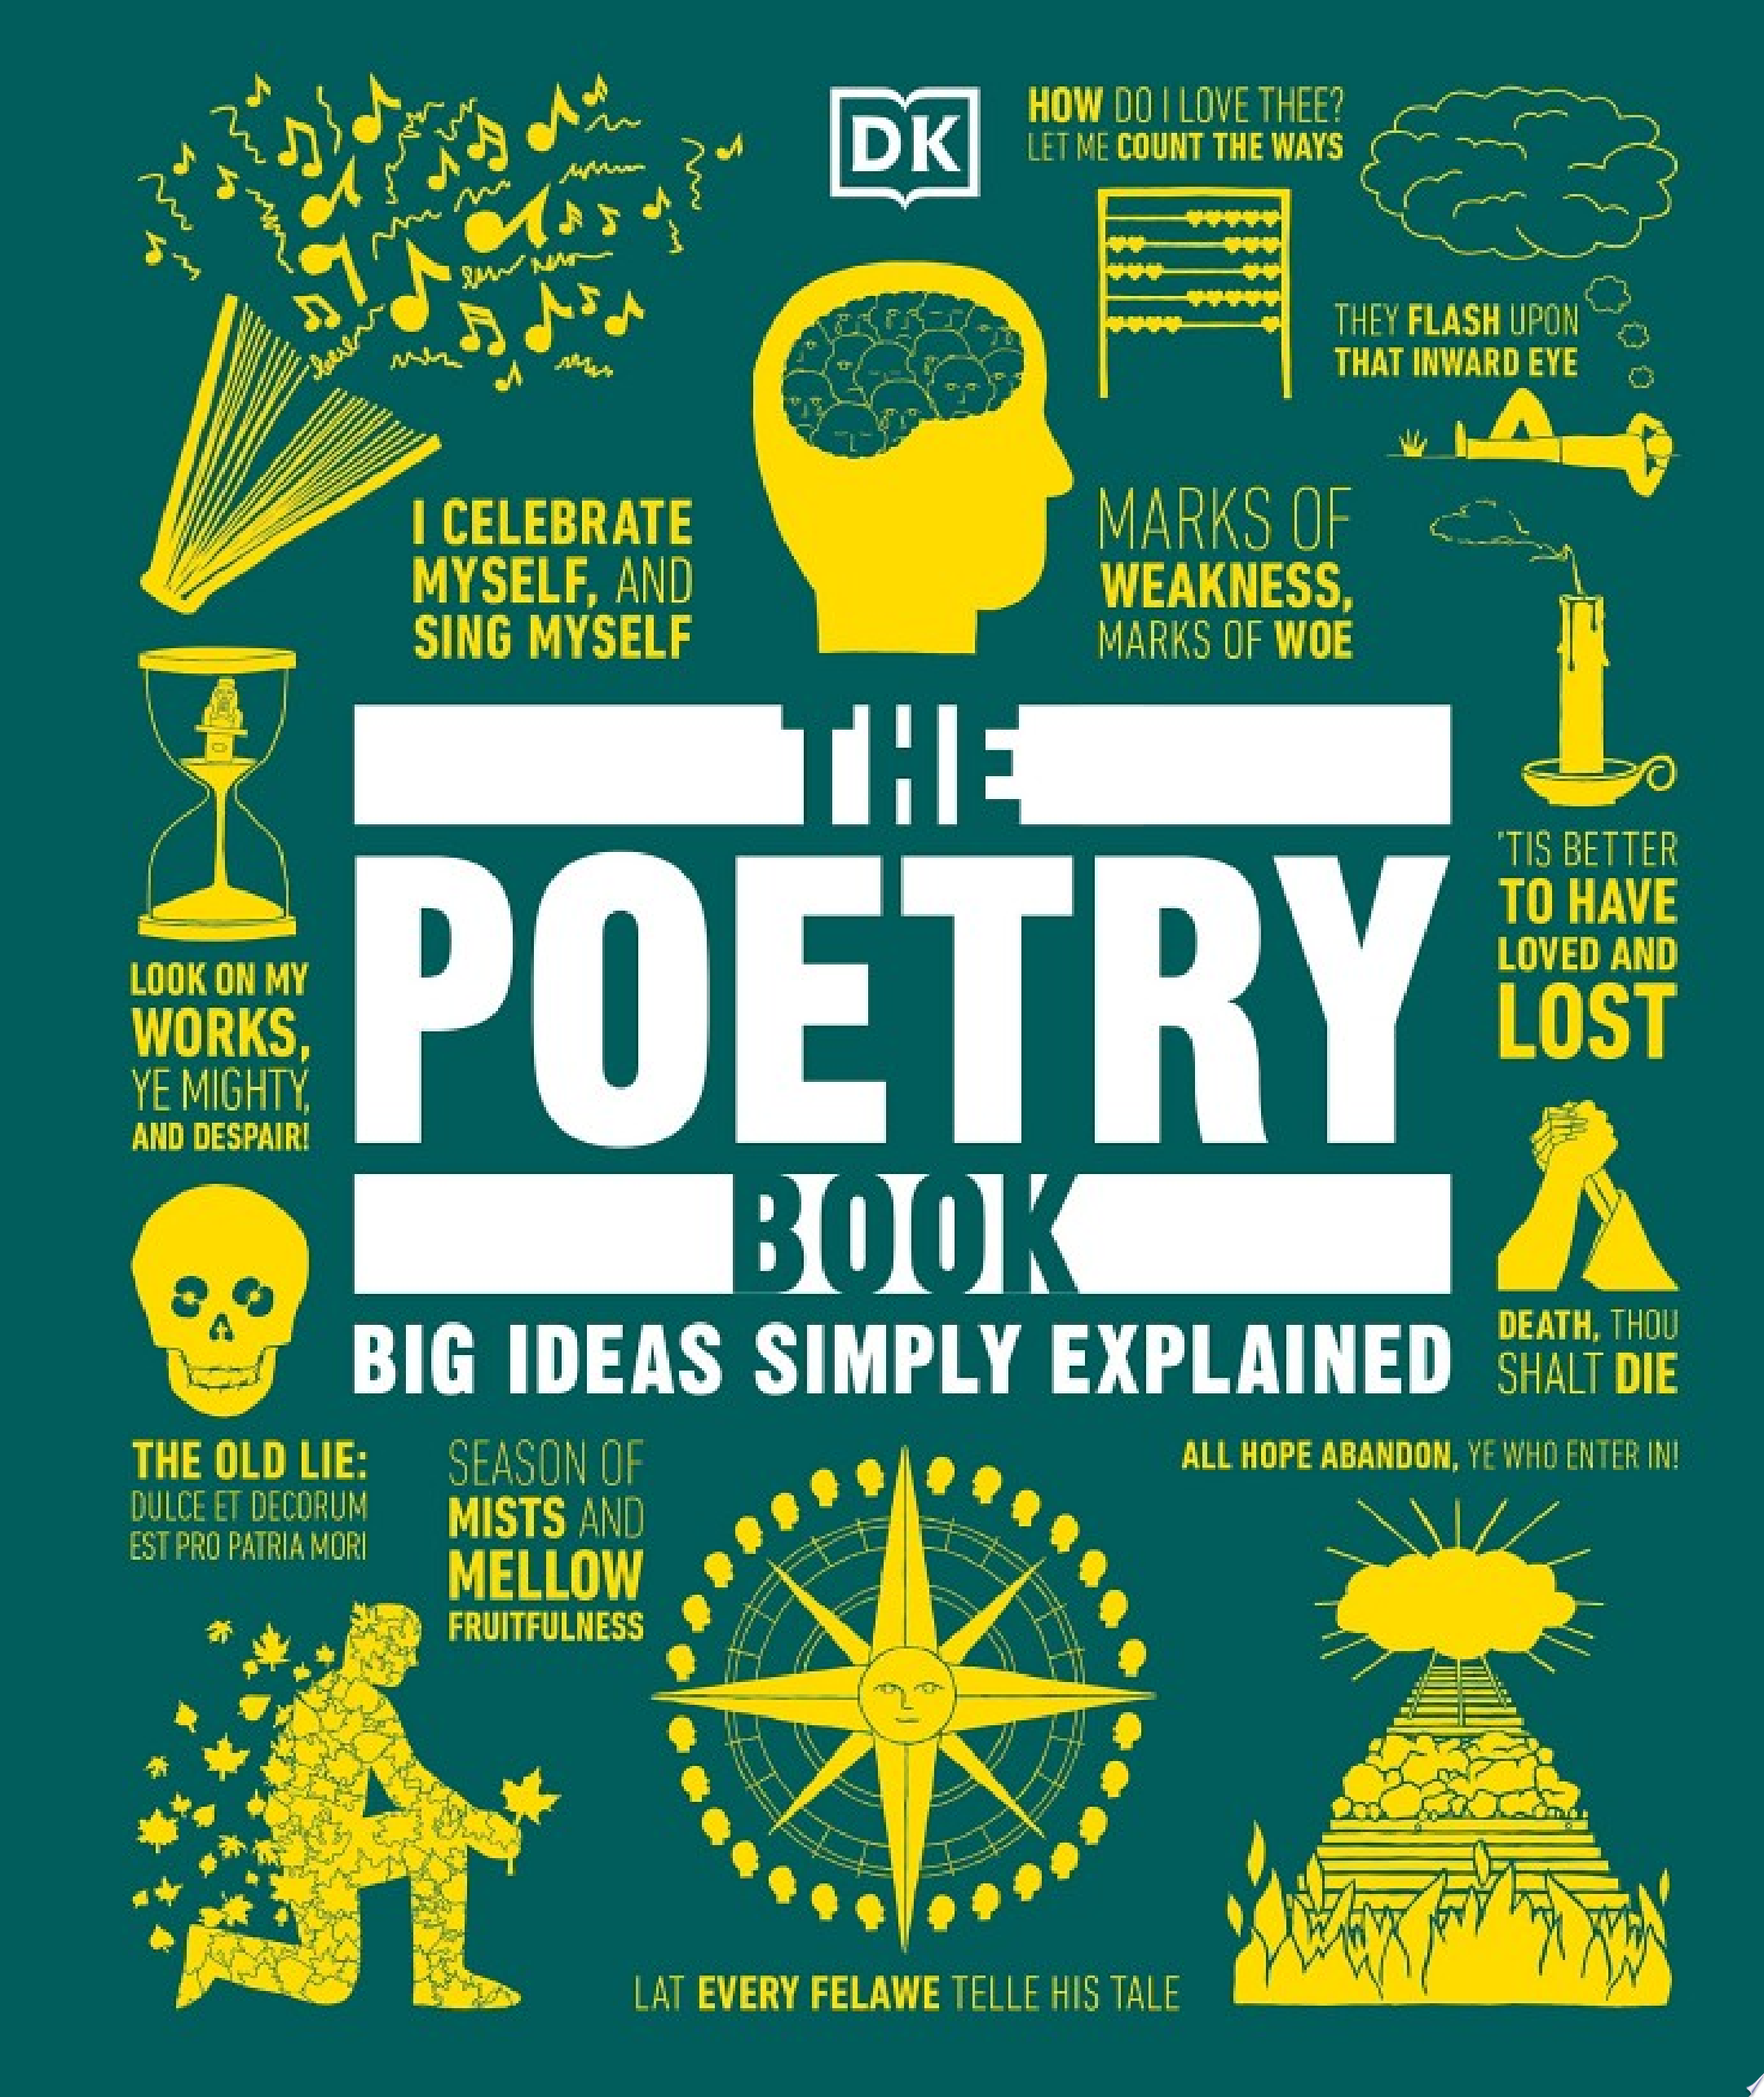 Image for "The Poetry Book"